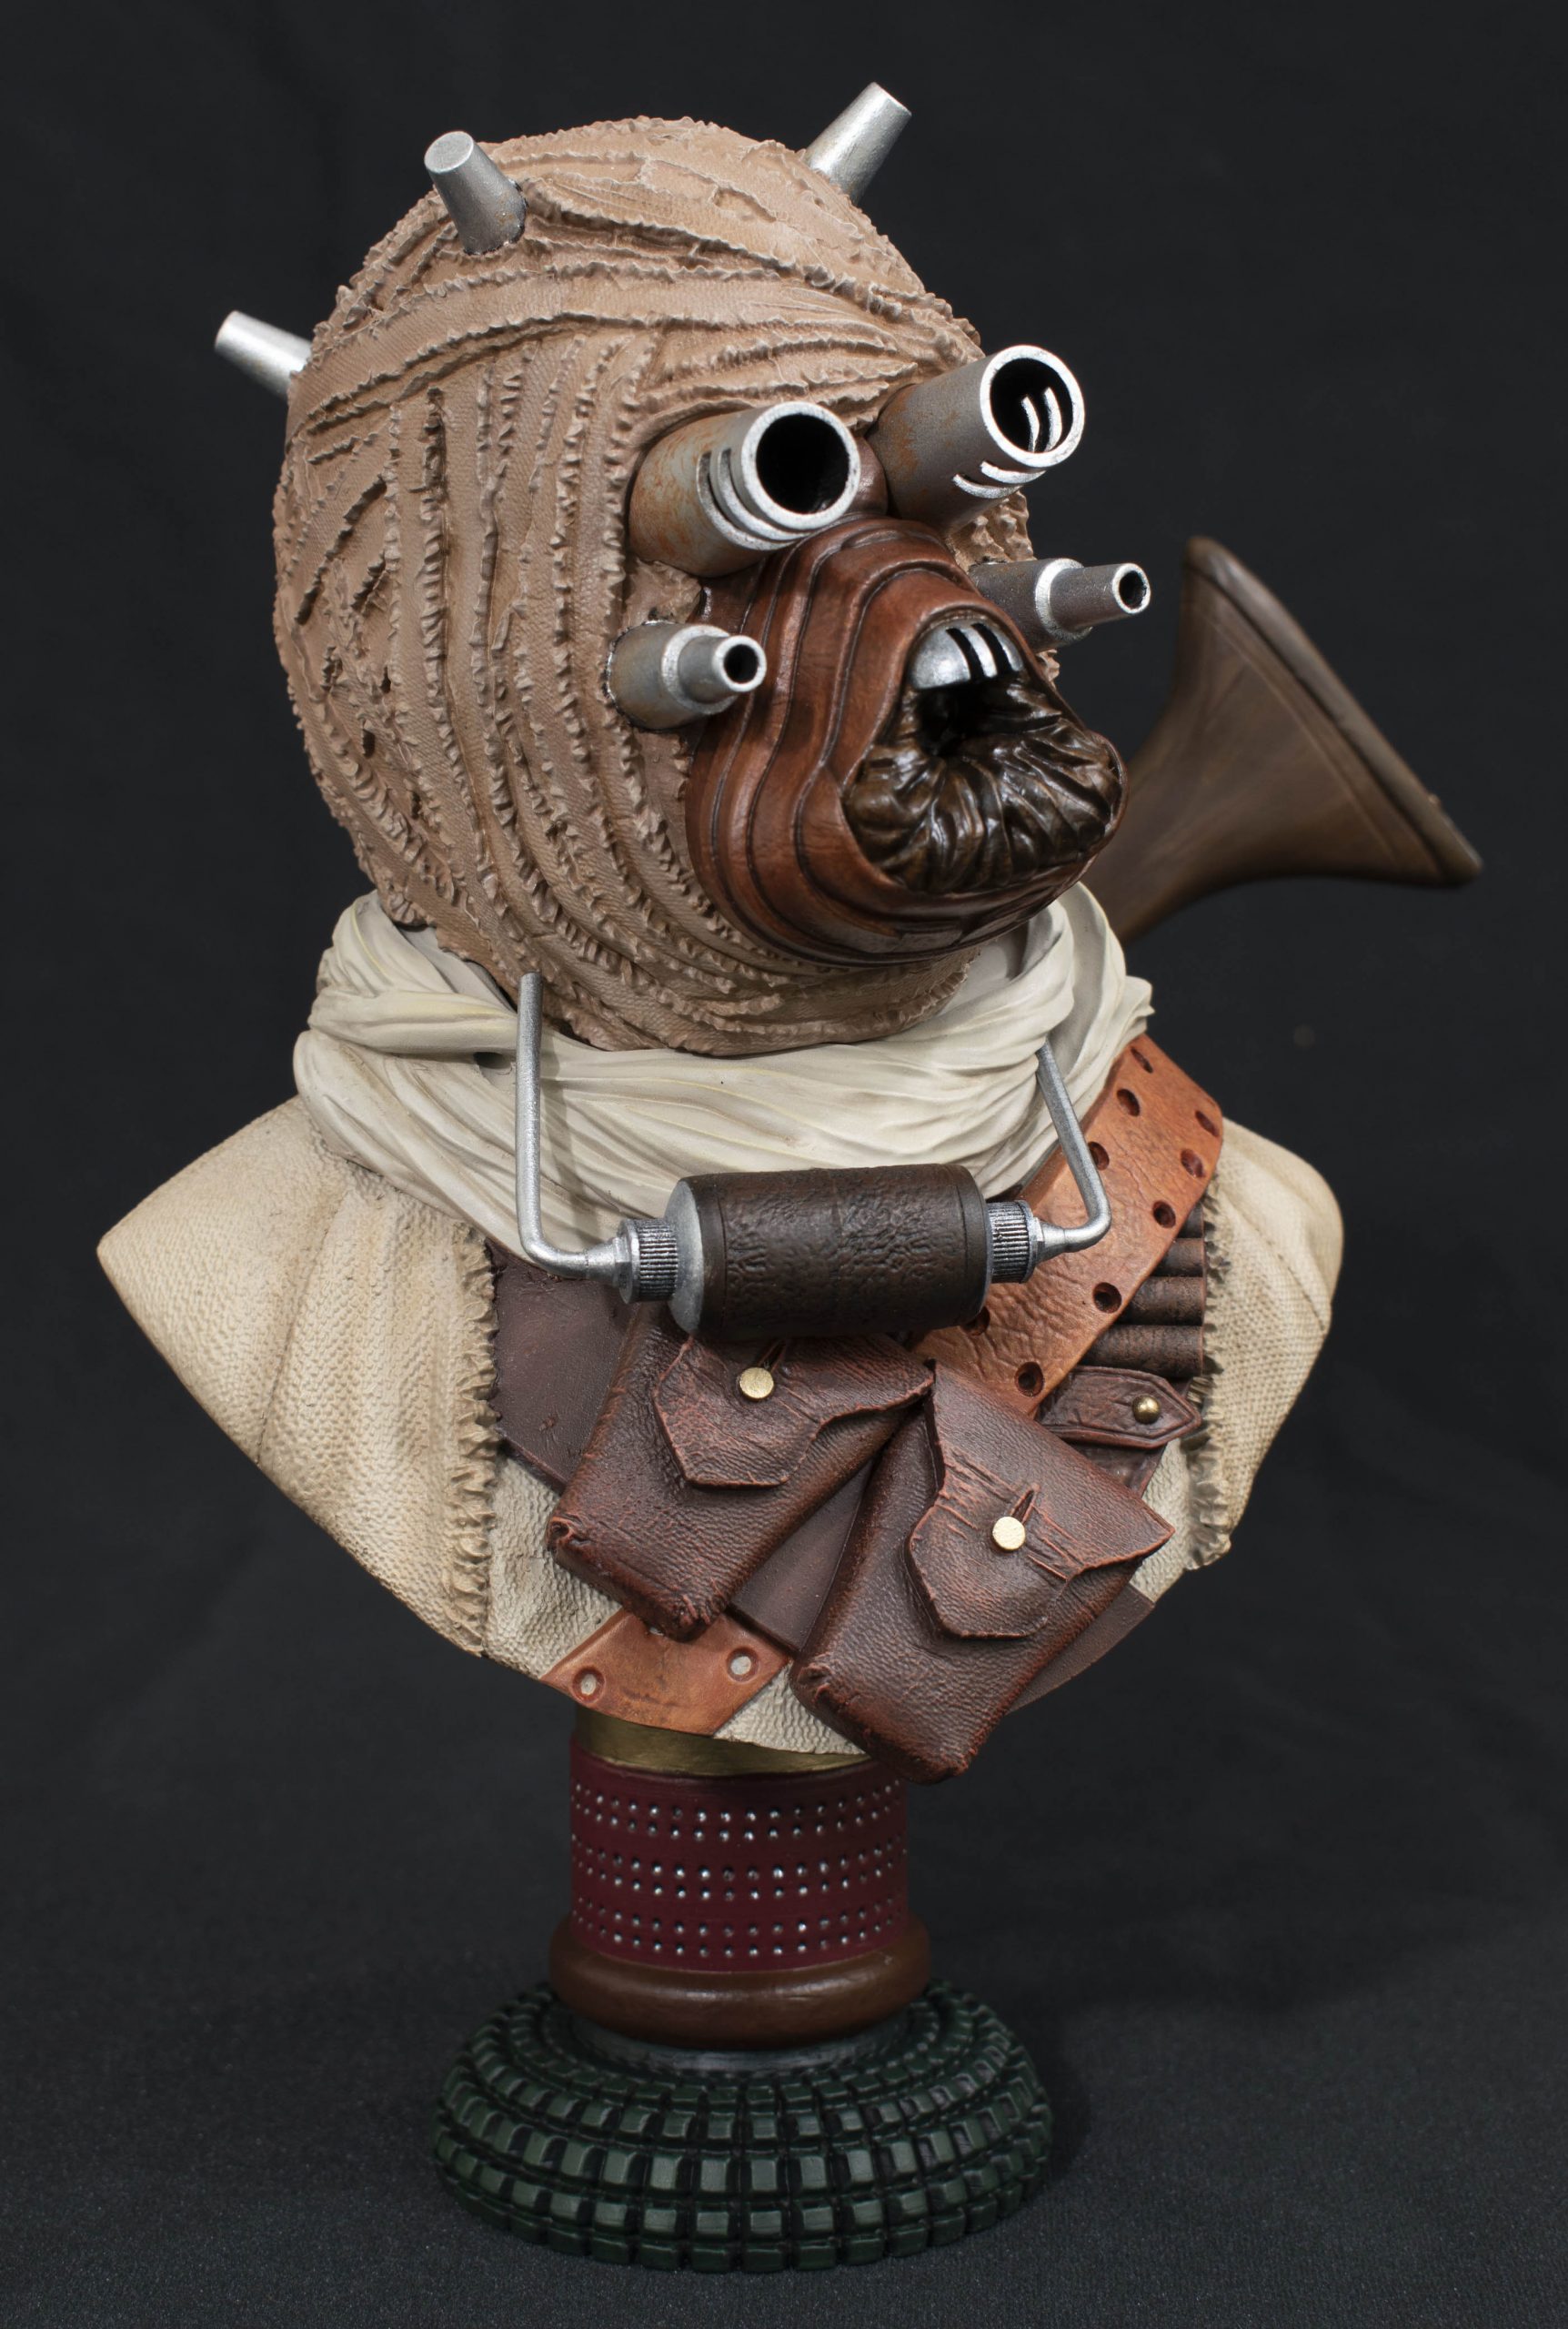 STAR WARS LEGENDS IN 3D A NEW HOPE TUSKEN RAIDER 1/2 SCALE BUST